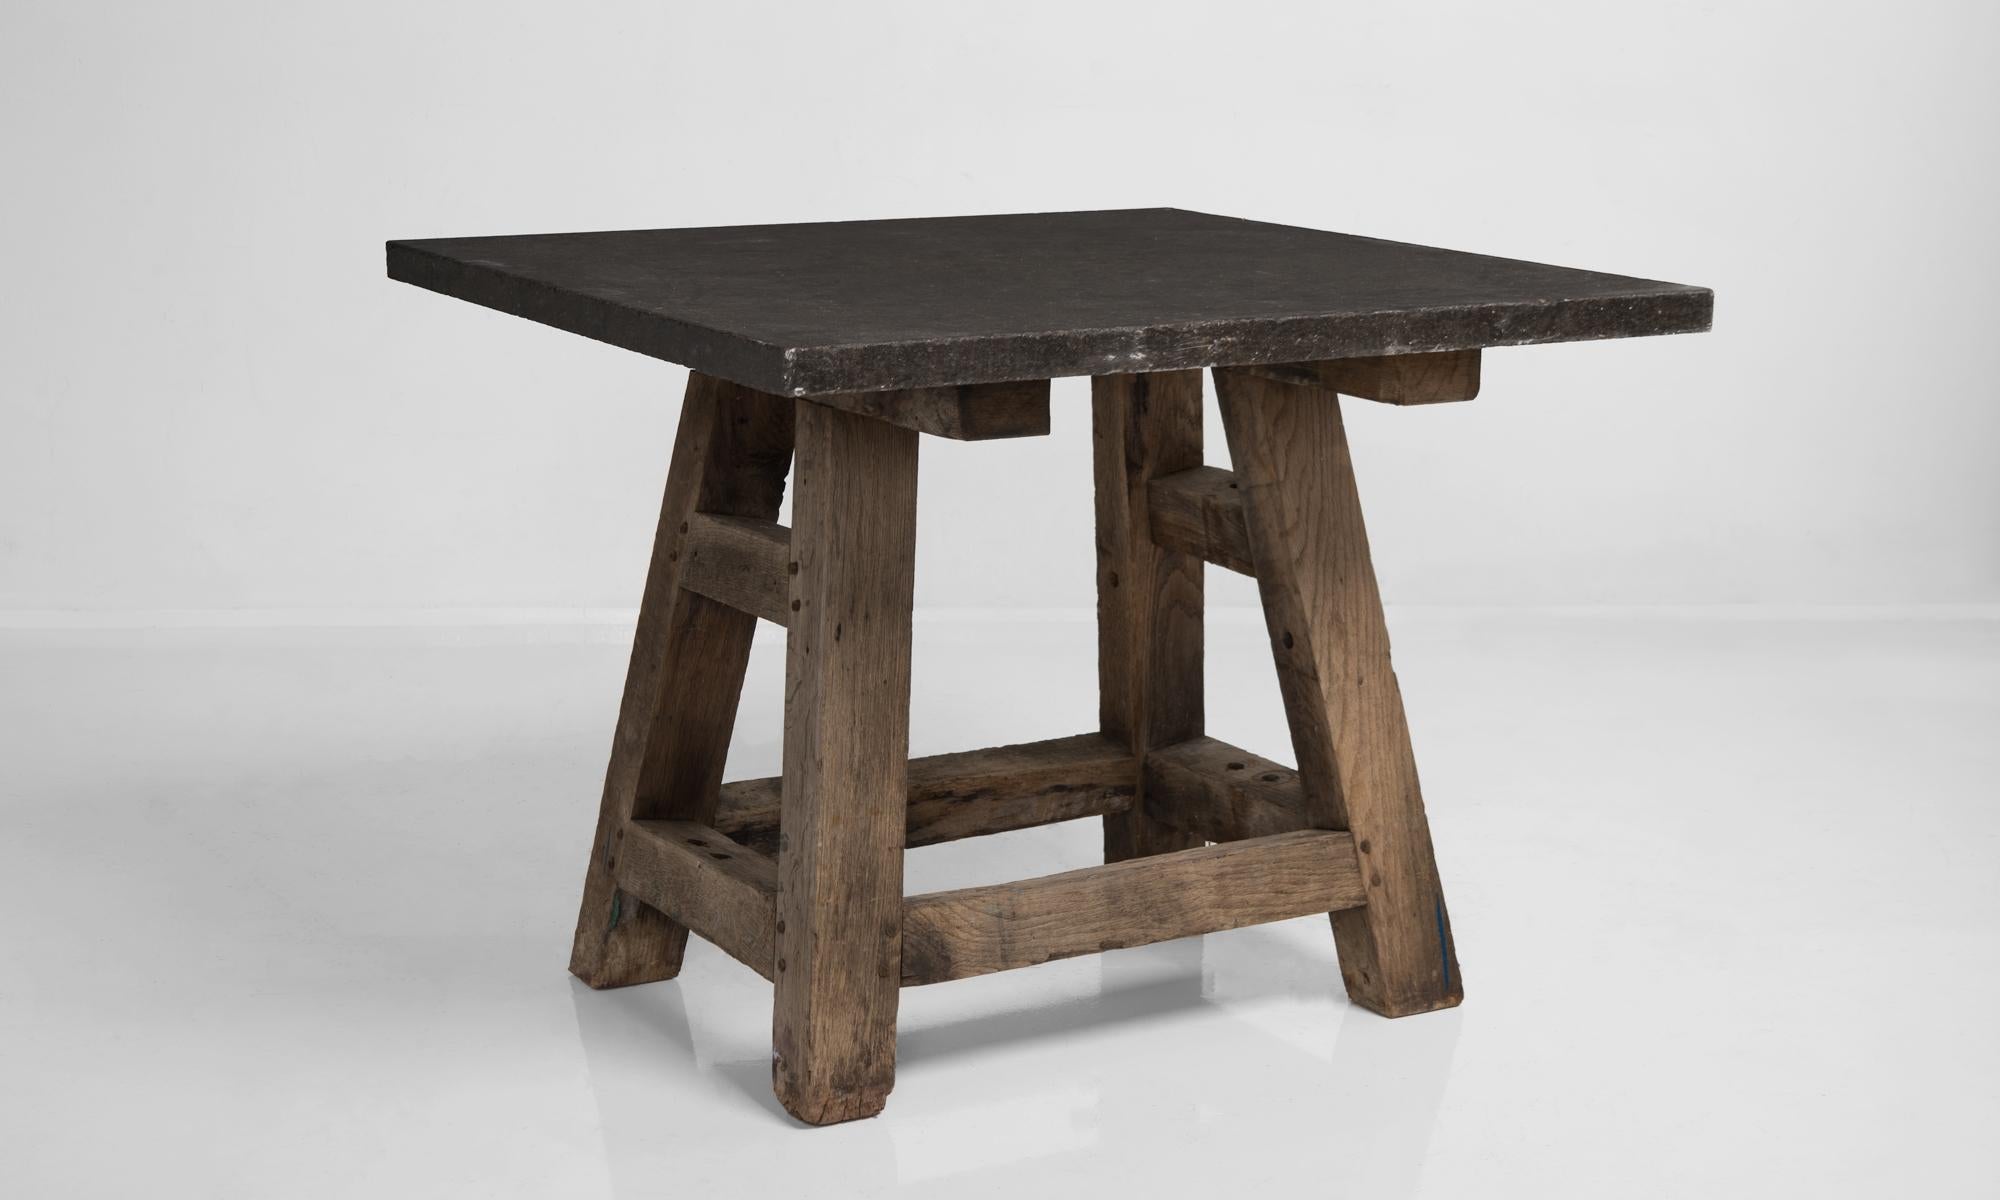 Blue stone workshop table, France, circa 1930.

Unique square-top industrial table with thick wood legs and beautiful stone top.